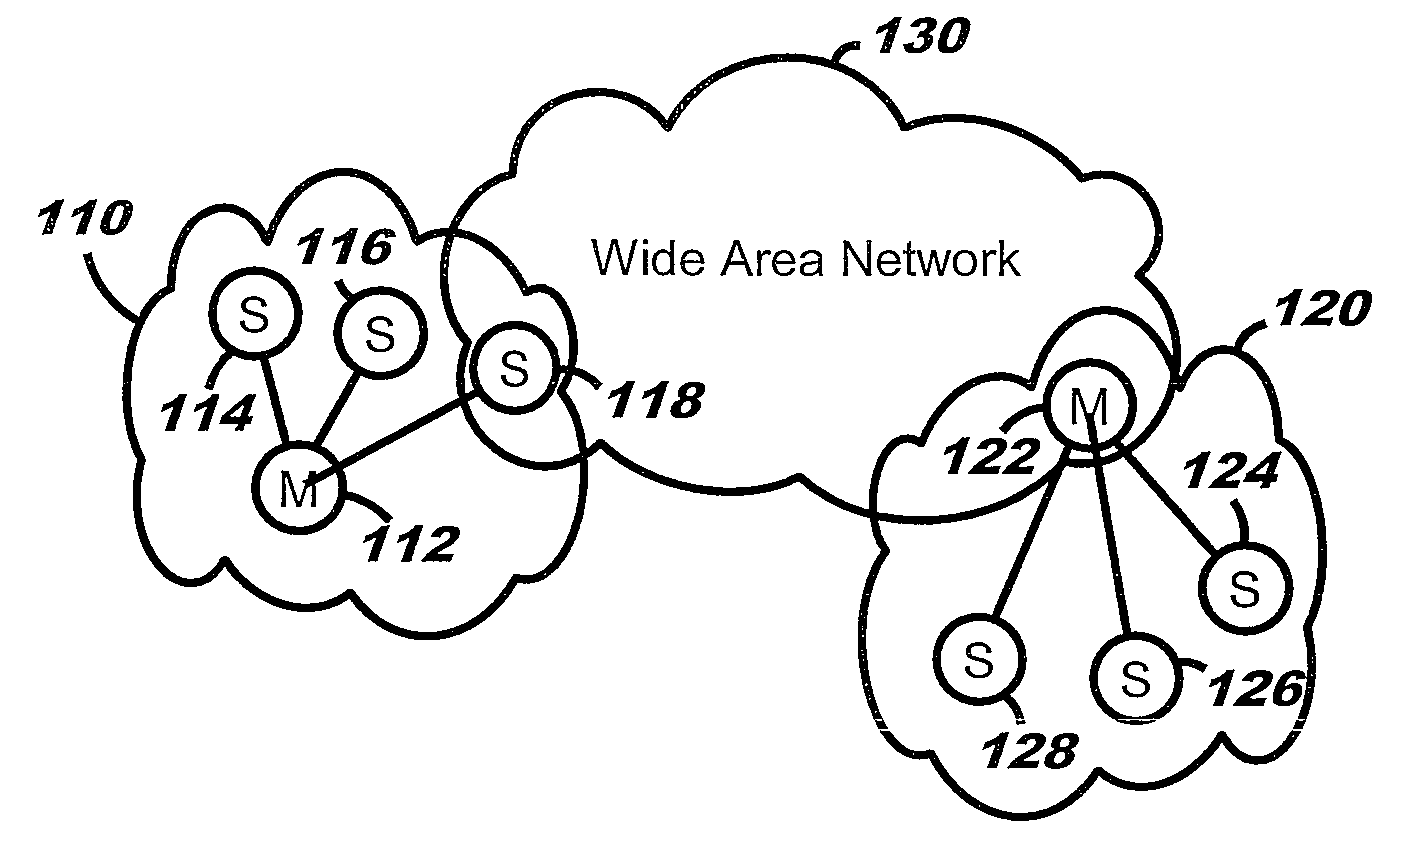 Computer Program Products for Connecting Ad Hoc Piconets to Wide Area Networks